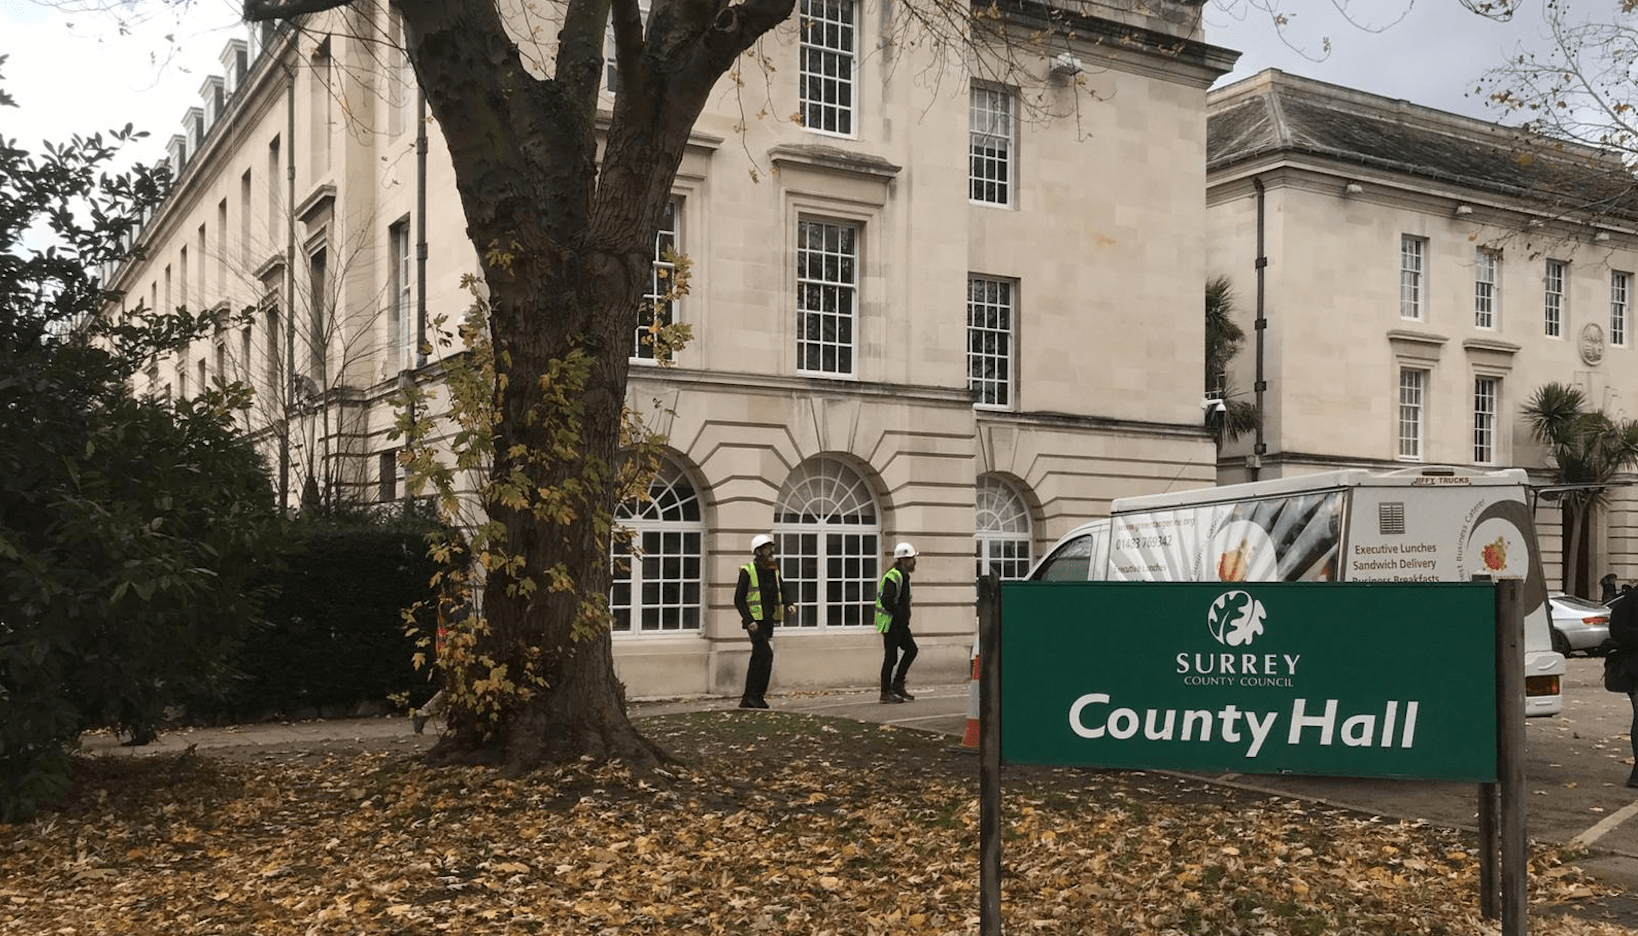 Surrey County Council to leave Kingston in 2020 after 50 years